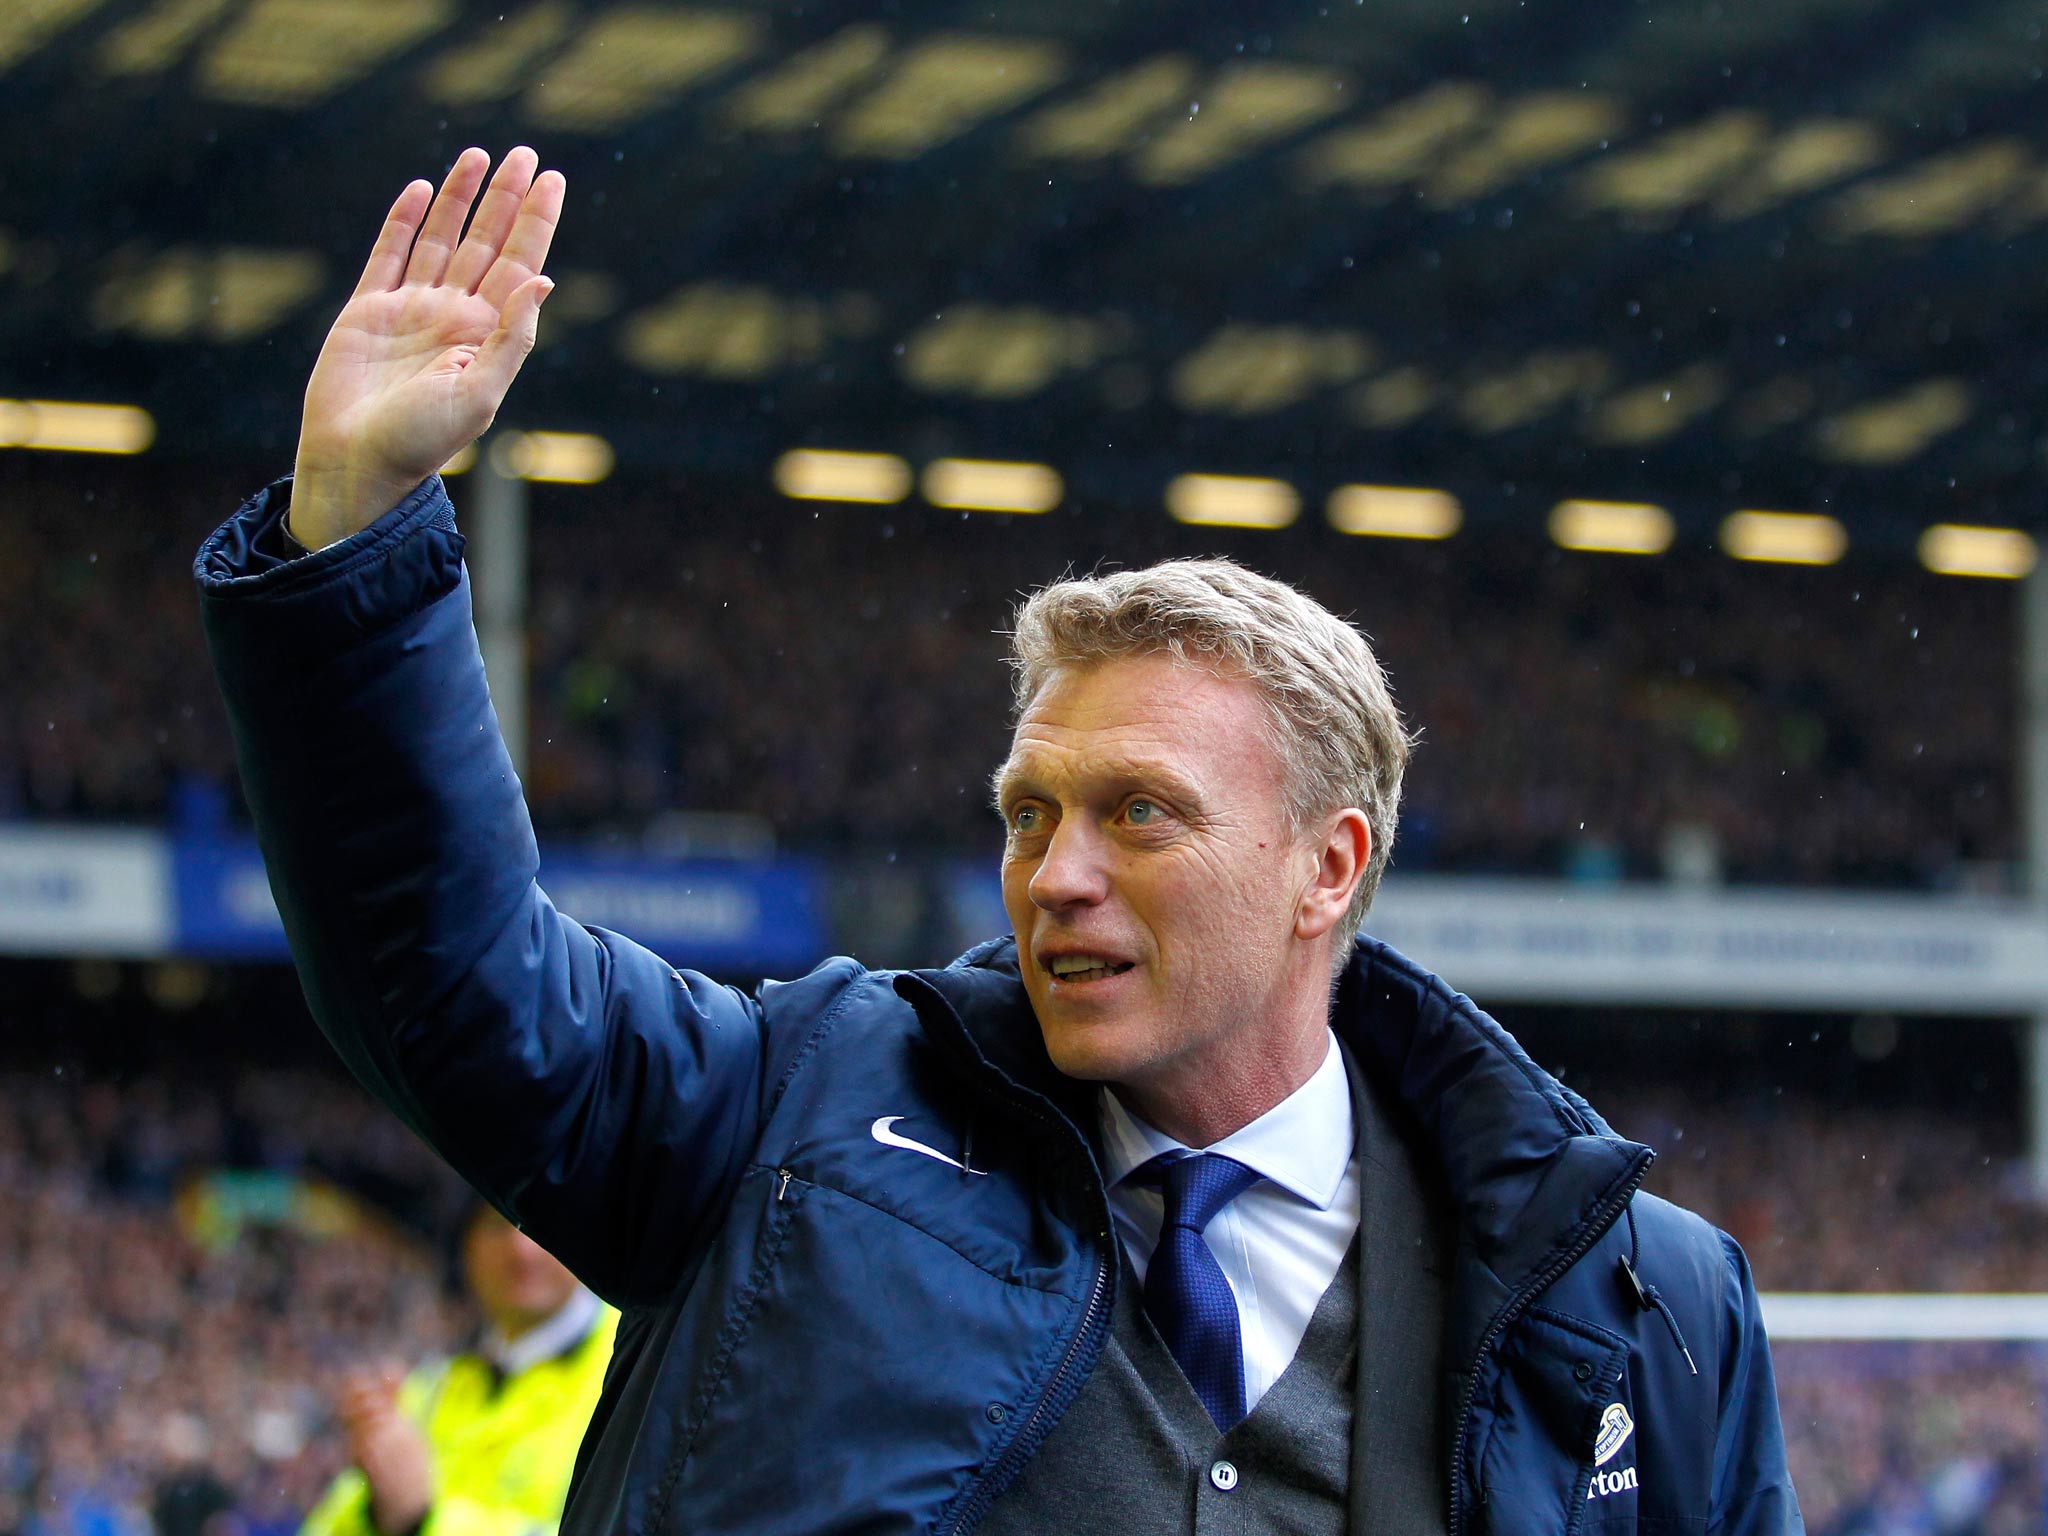 David Moyes waves goodbye to the Everton fans in his final game as Everton boss at Goodison Park